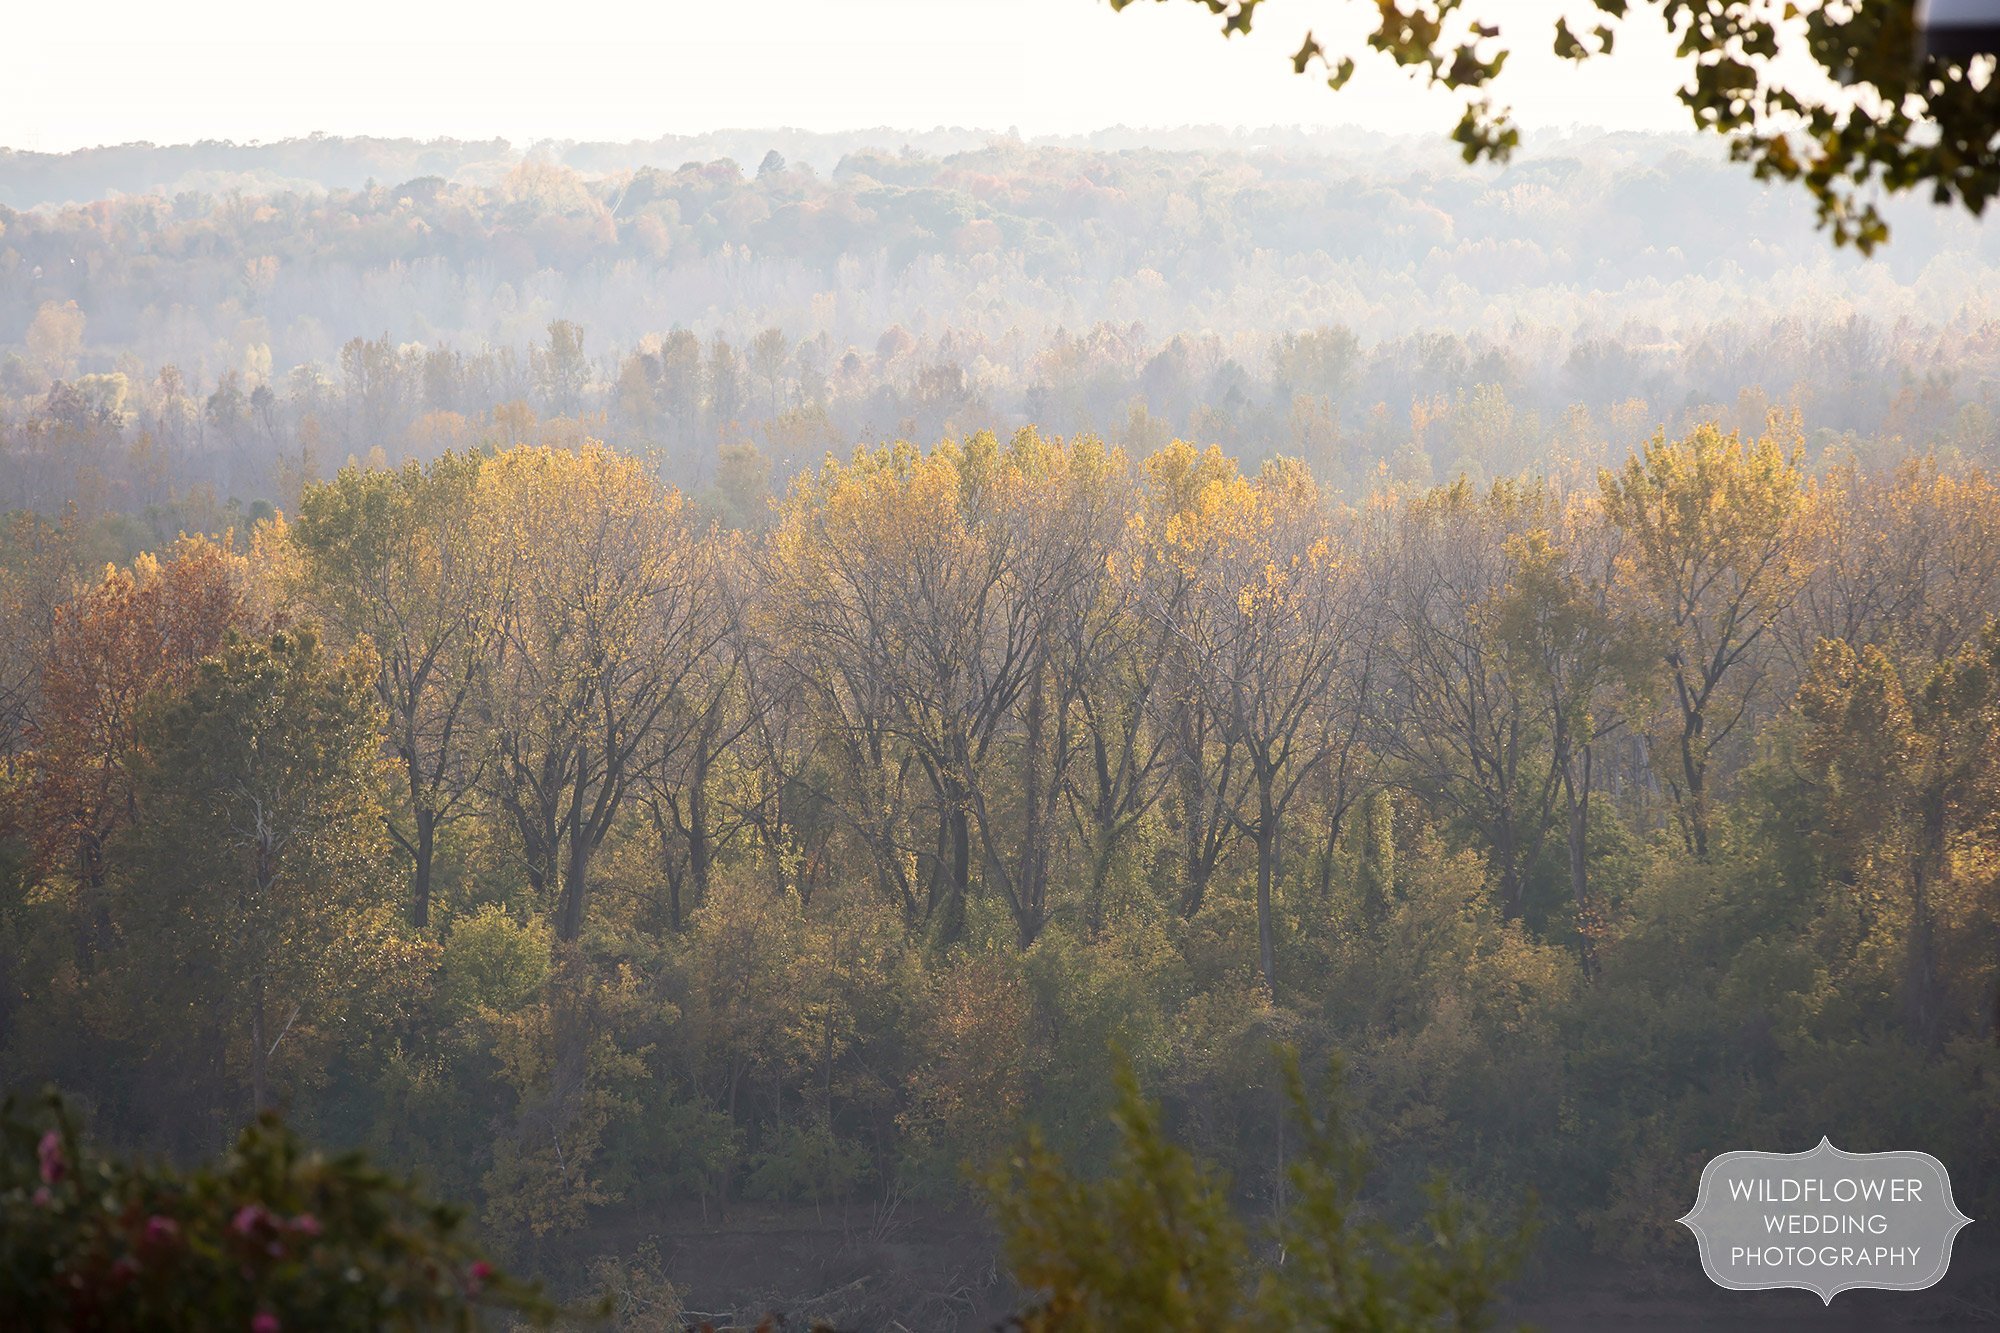 Beautiful fall colors overlooking the Missouri River for this Les Bourgeois October wedding.